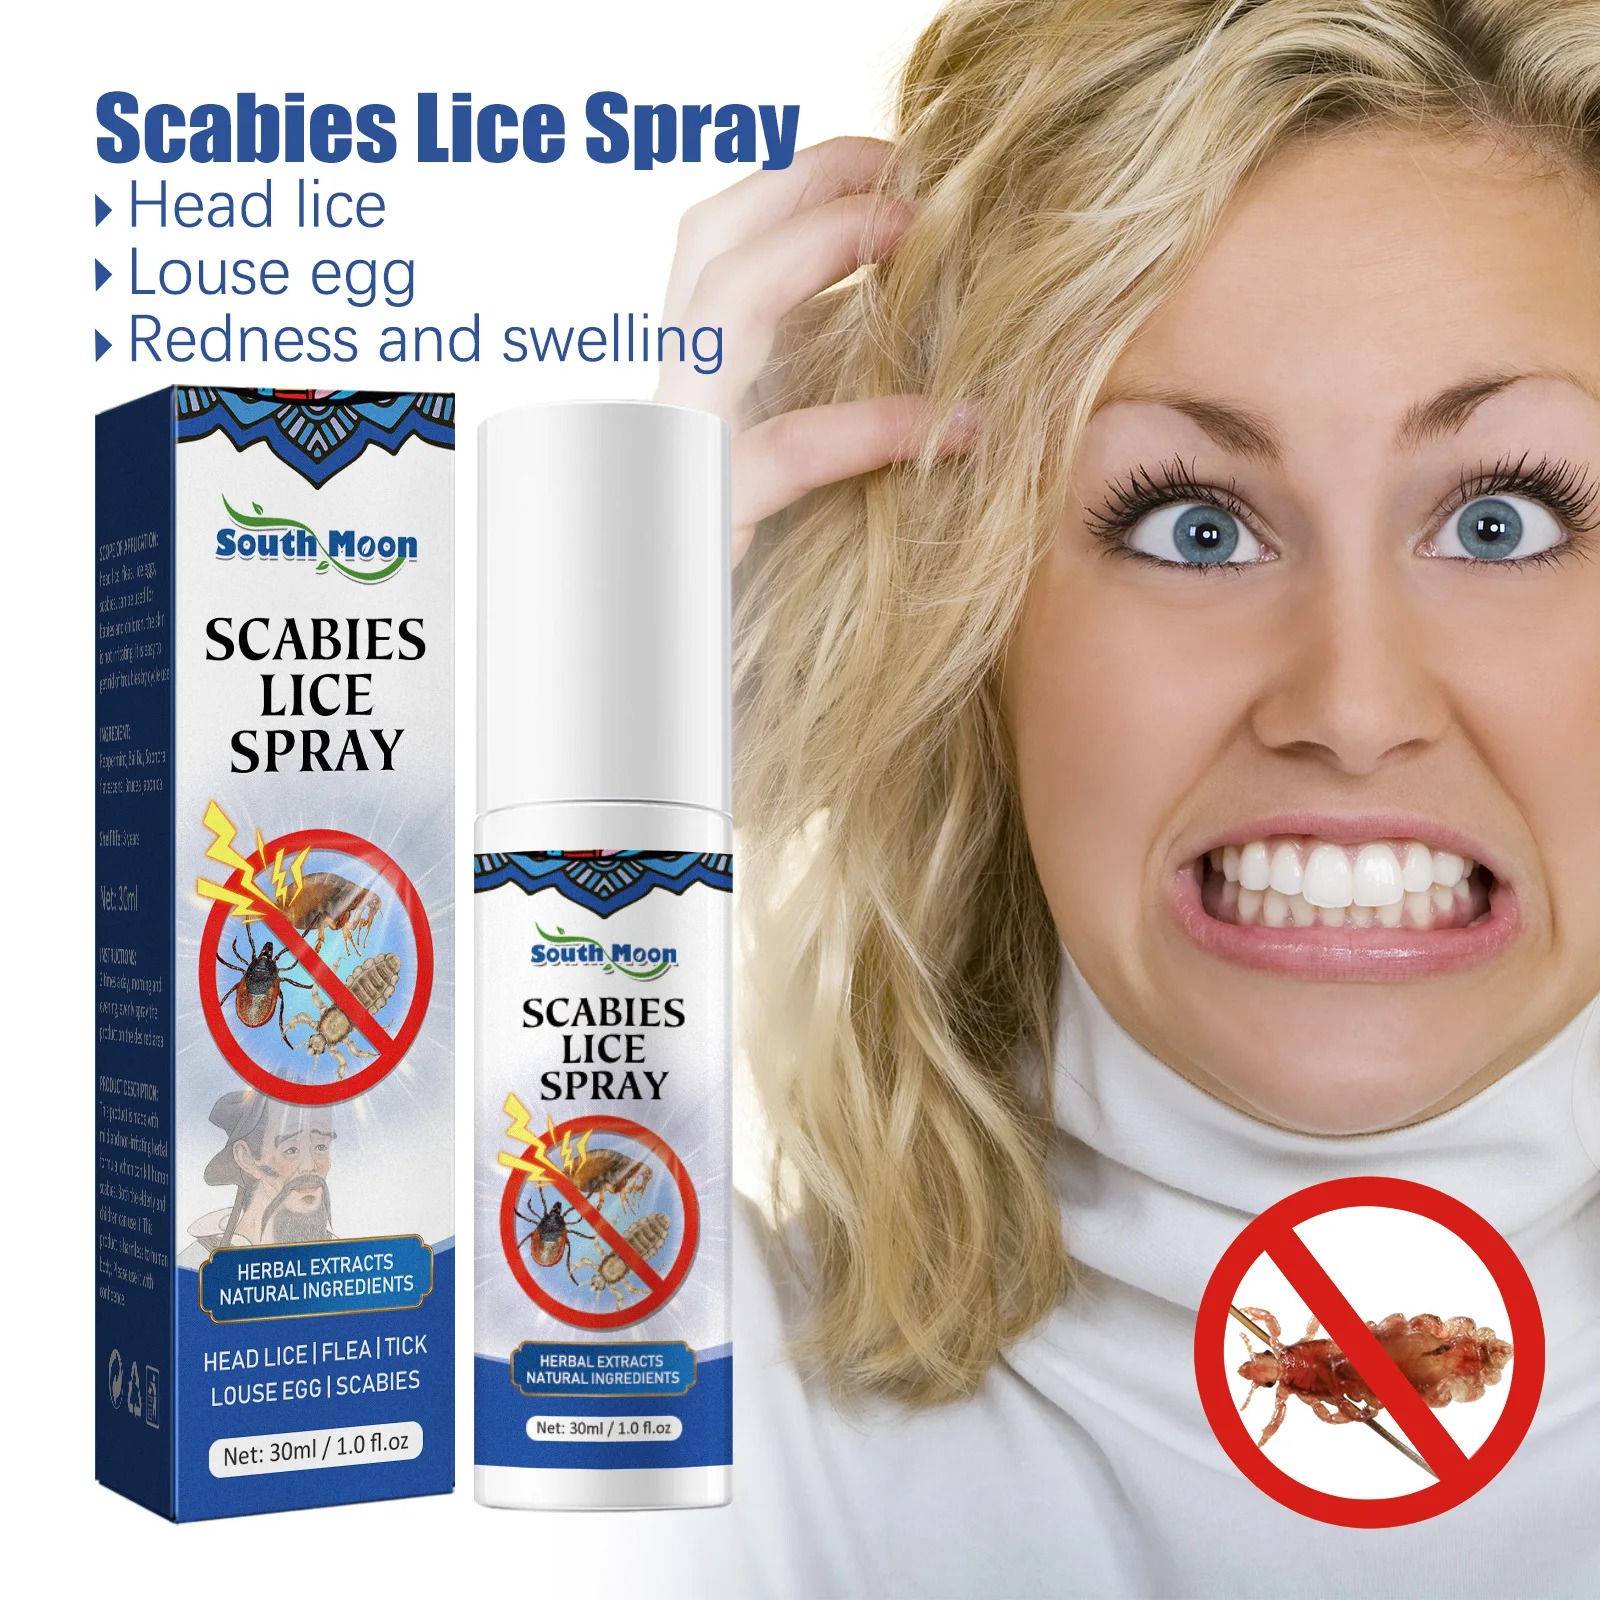 Pubic Lice Antibacterial Scabies Spray Removal Lice Eggs And Anti-itch Water Spray Anti-bacterial Liquid Scalp Care 30 ml